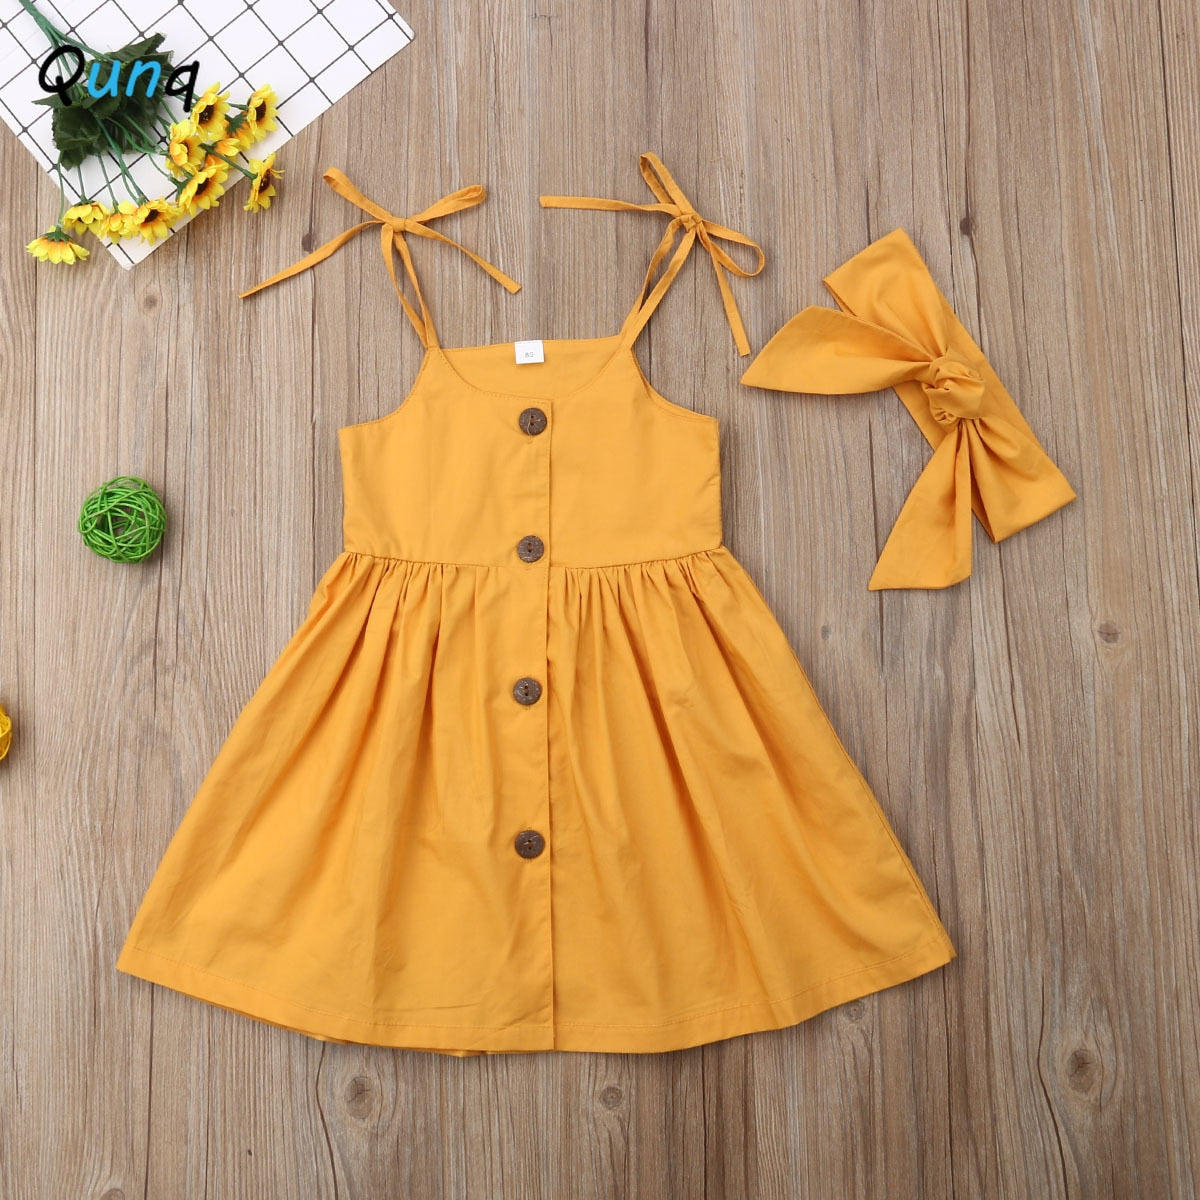 Bright Sundress with Adjustable Straps for Toddlers